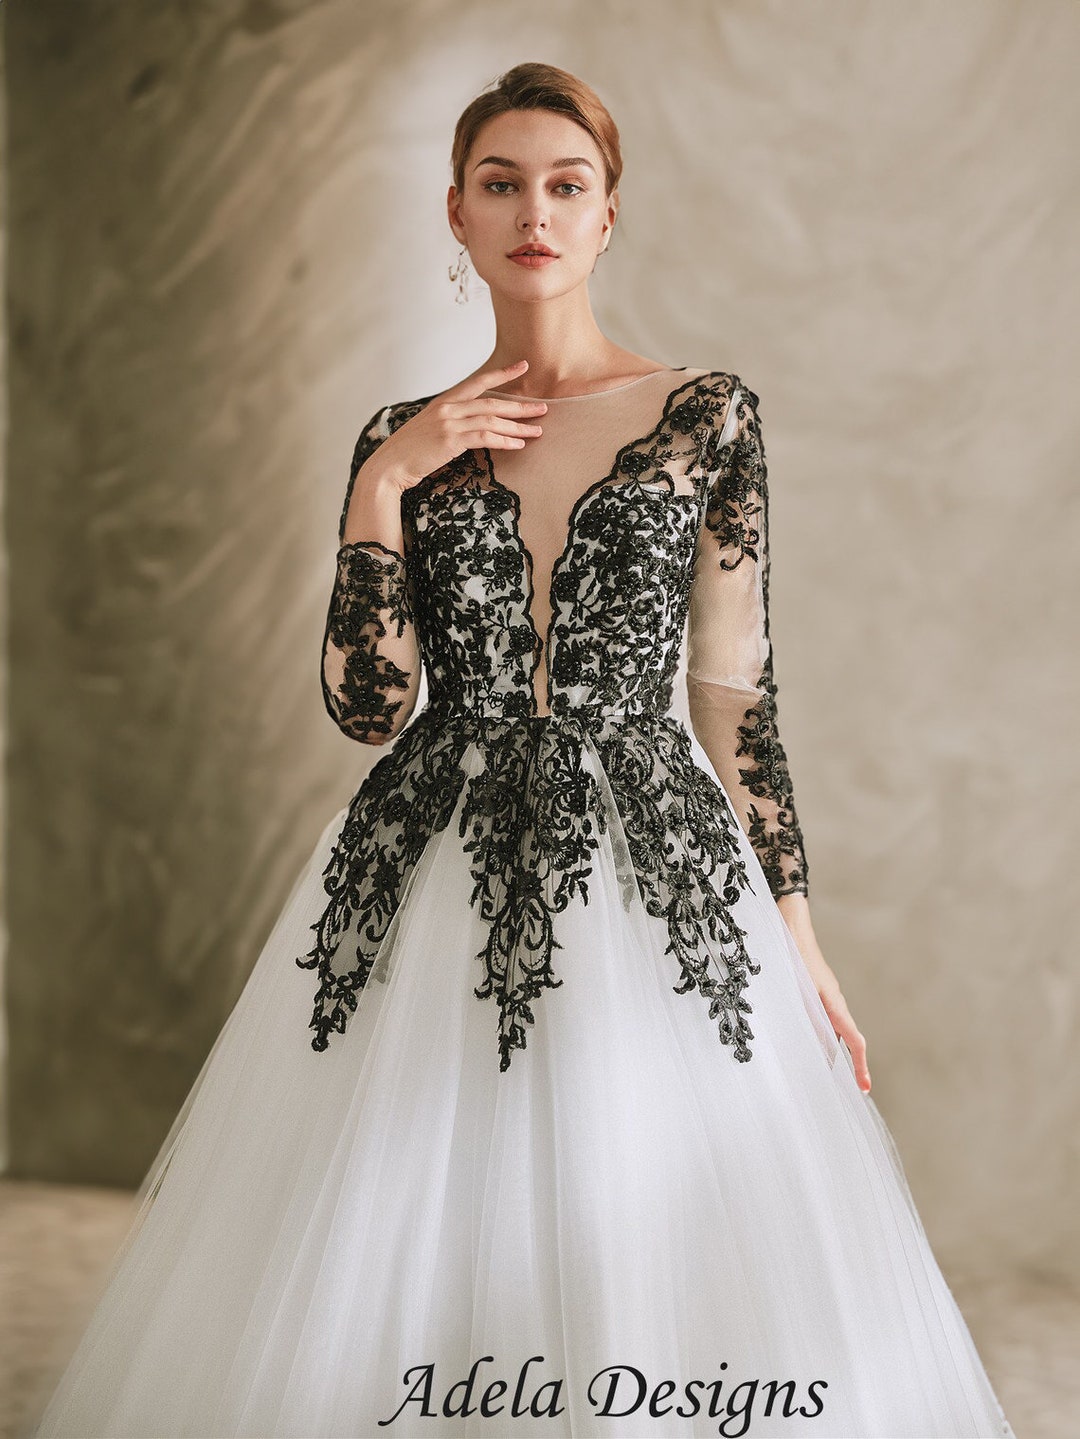 Untraditional Black and White Ball Gown Gothic Wedding Dress photo